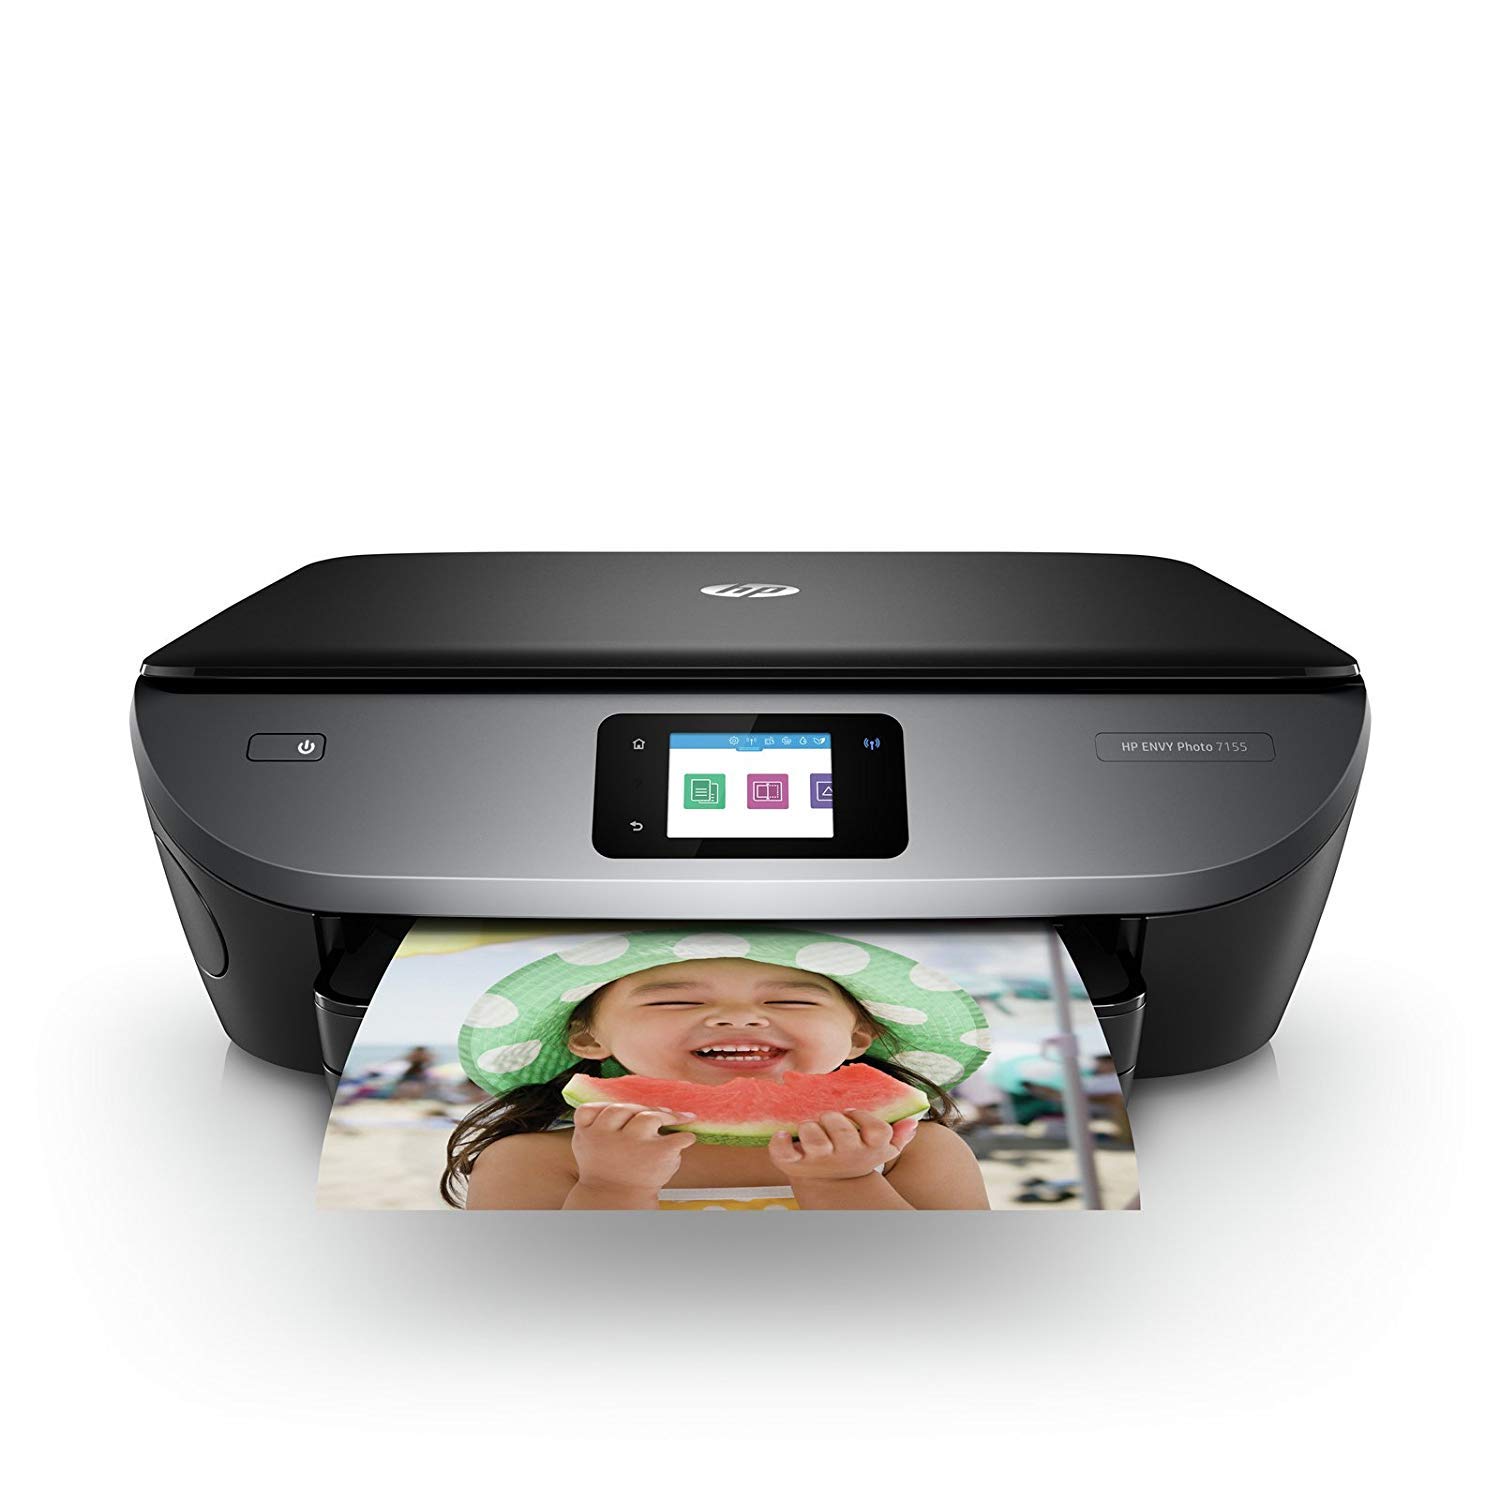 Top 8 Best HP Photo Printers in 2022 - Reviews and Comparison